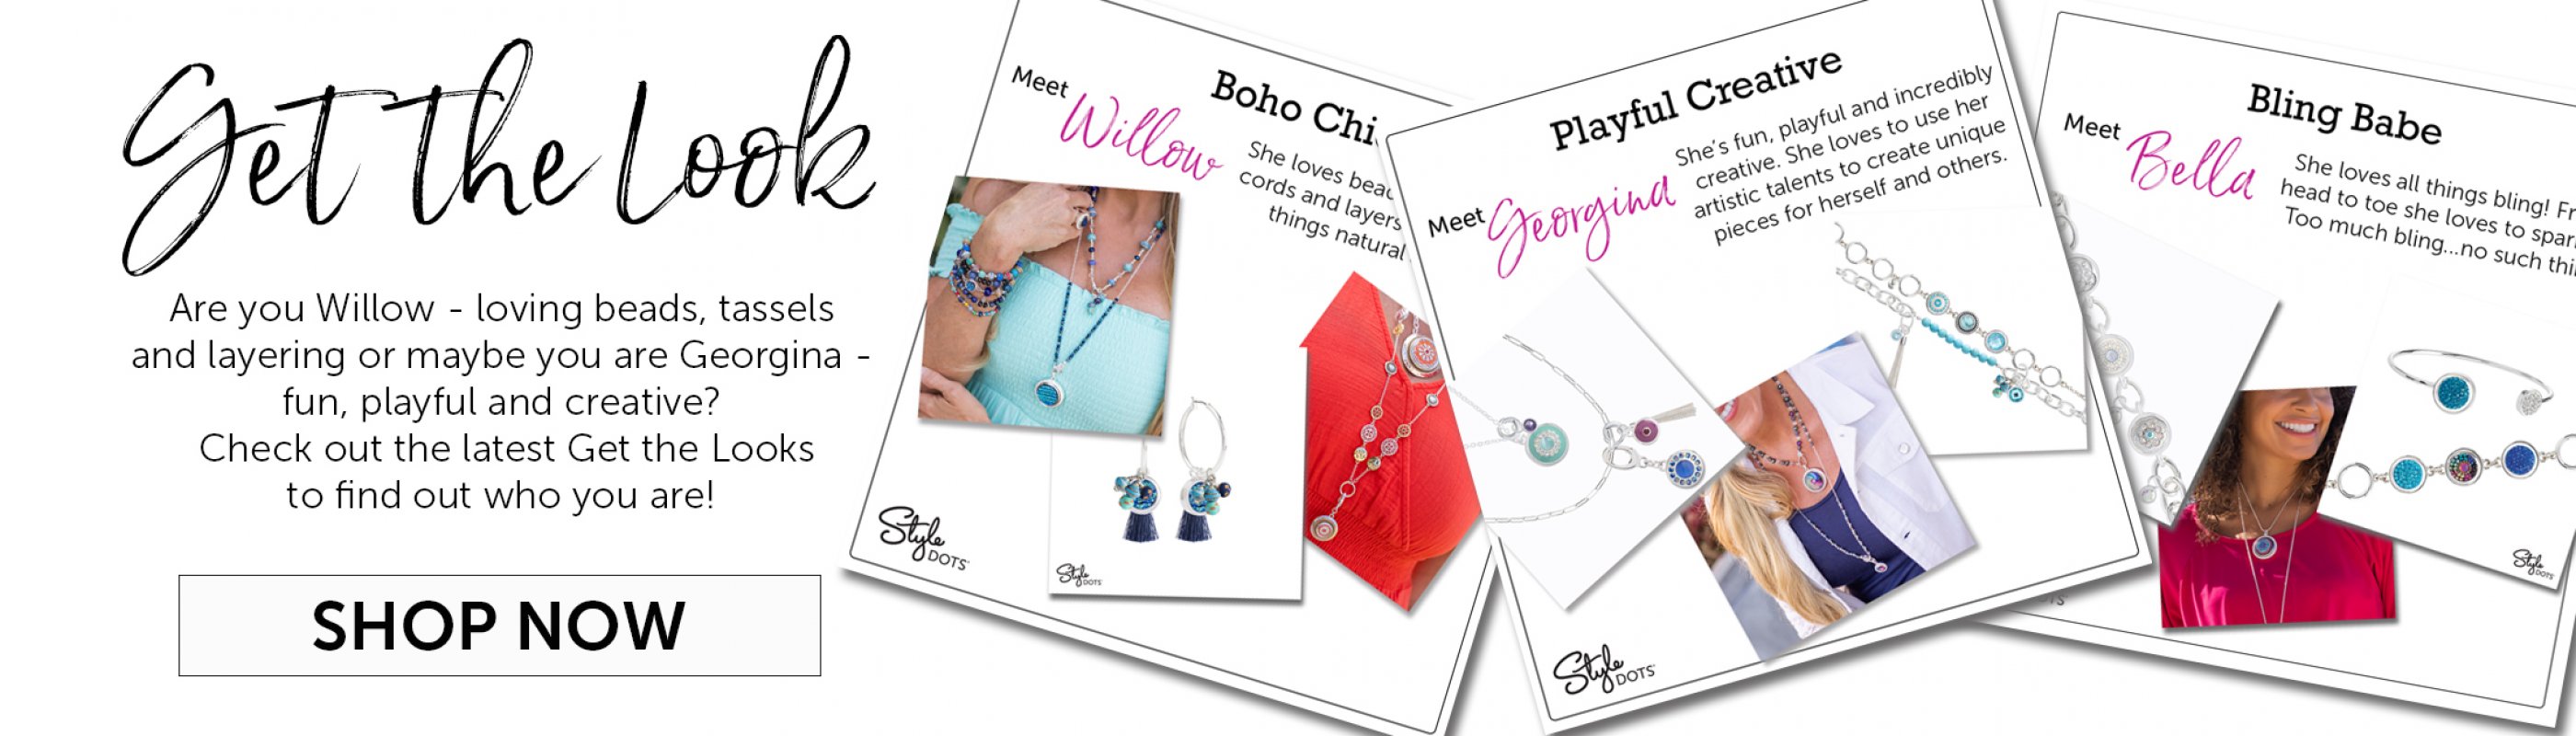 Get the Look styles: Willow, Georgina and Bella